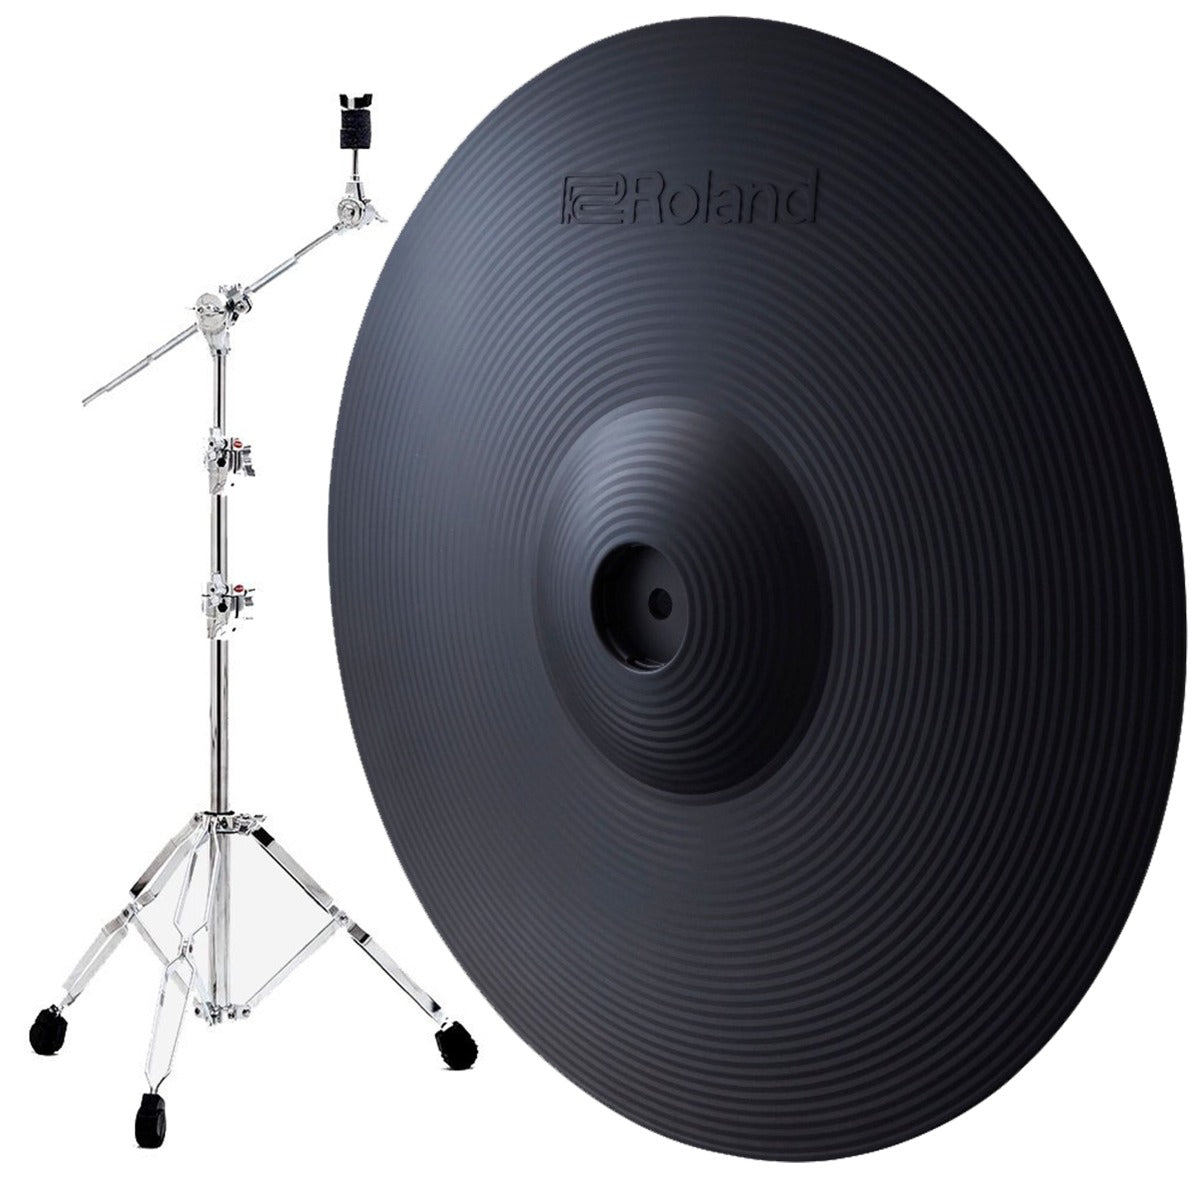 Collage of the Roland CY-14RT VAD-Cymbal 14" Thin Ride CYMBAL PAK showing included components